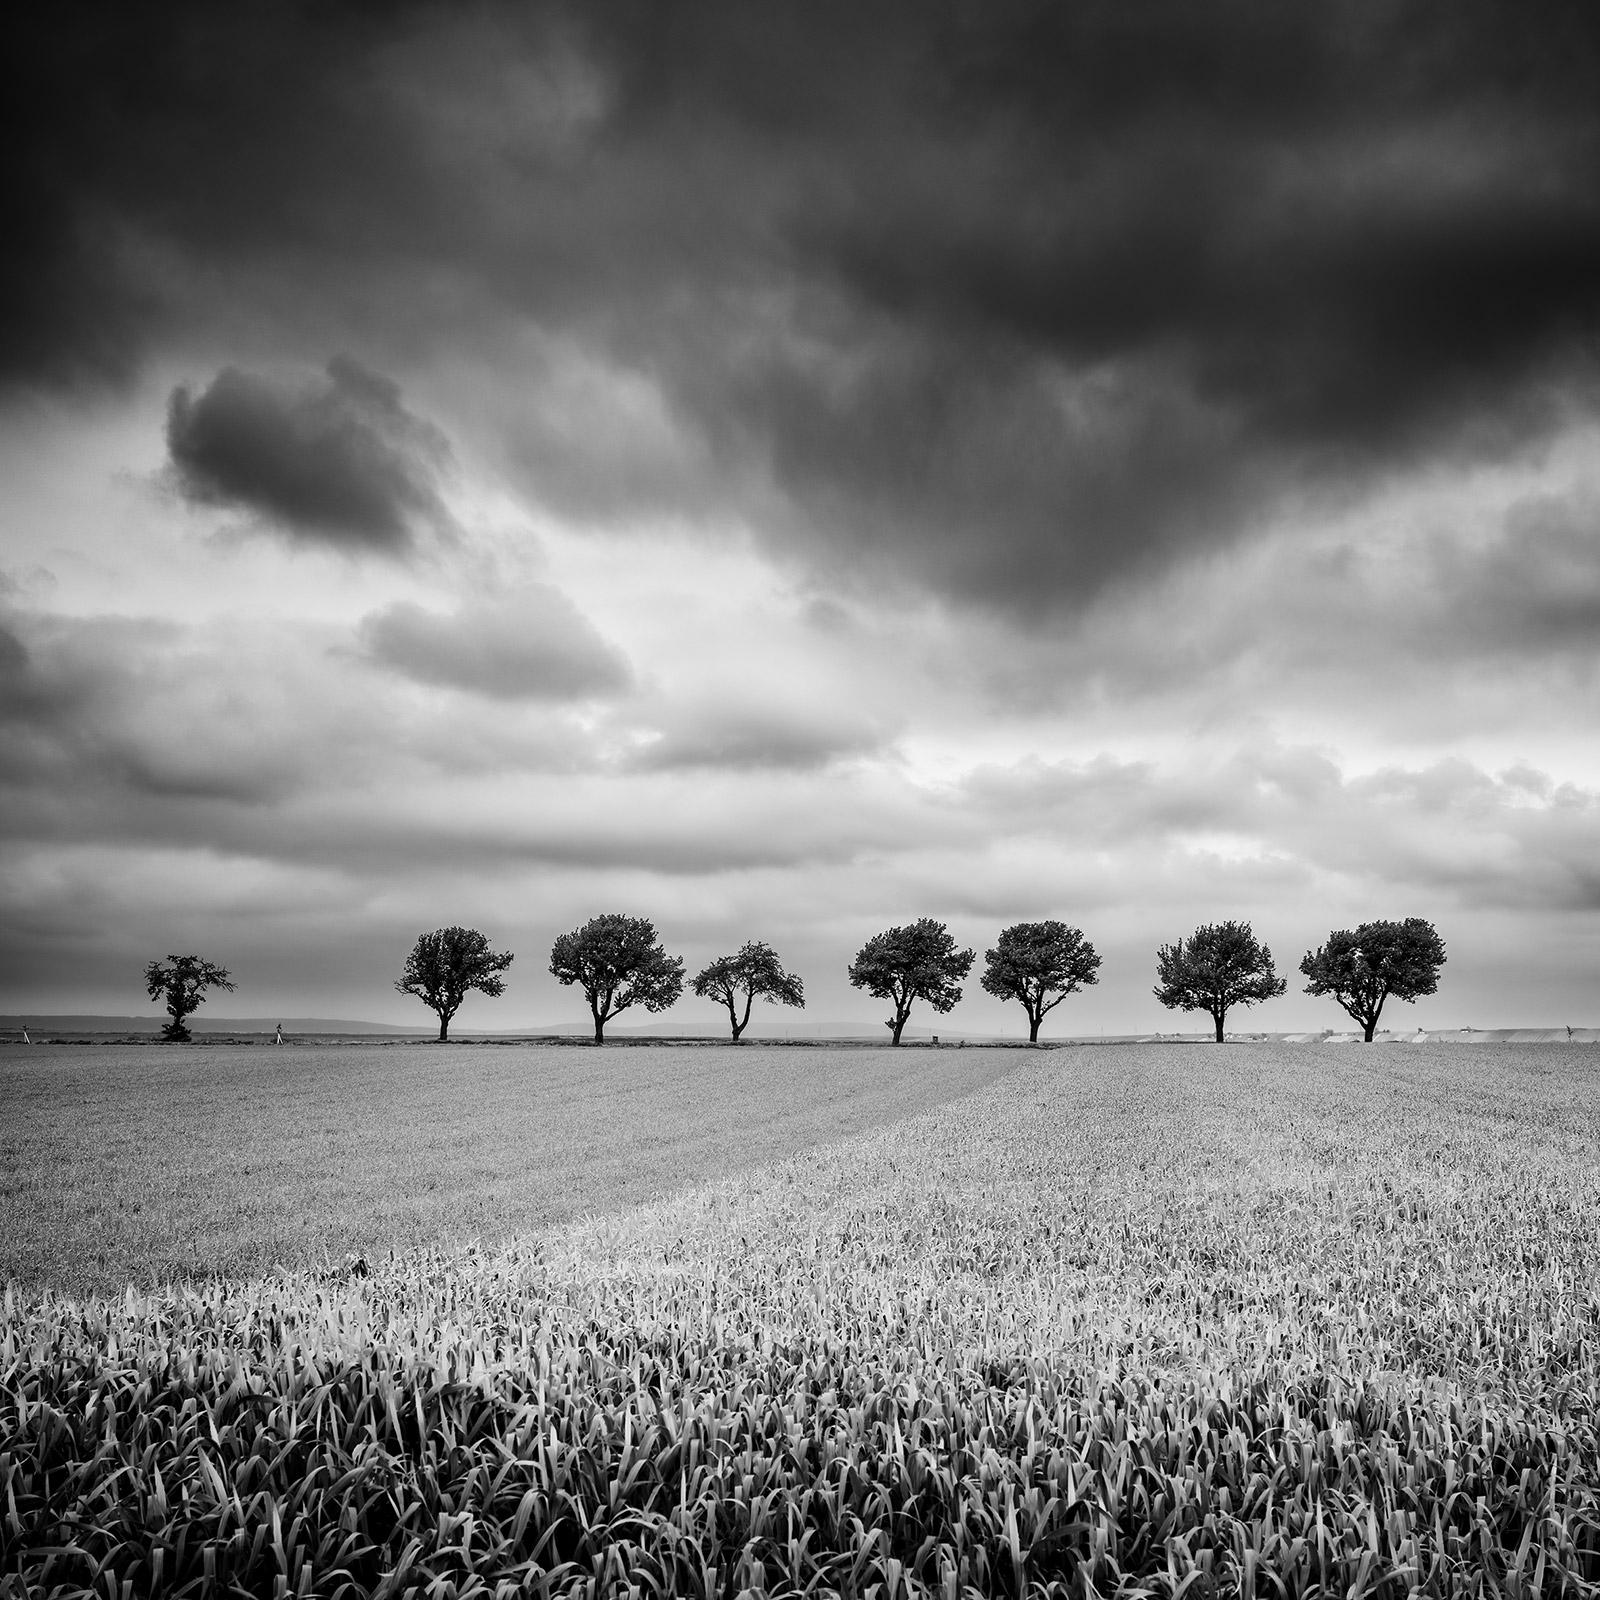 Eleven Cherry Trees, stormy Clouds, black and white, landscape, art photography